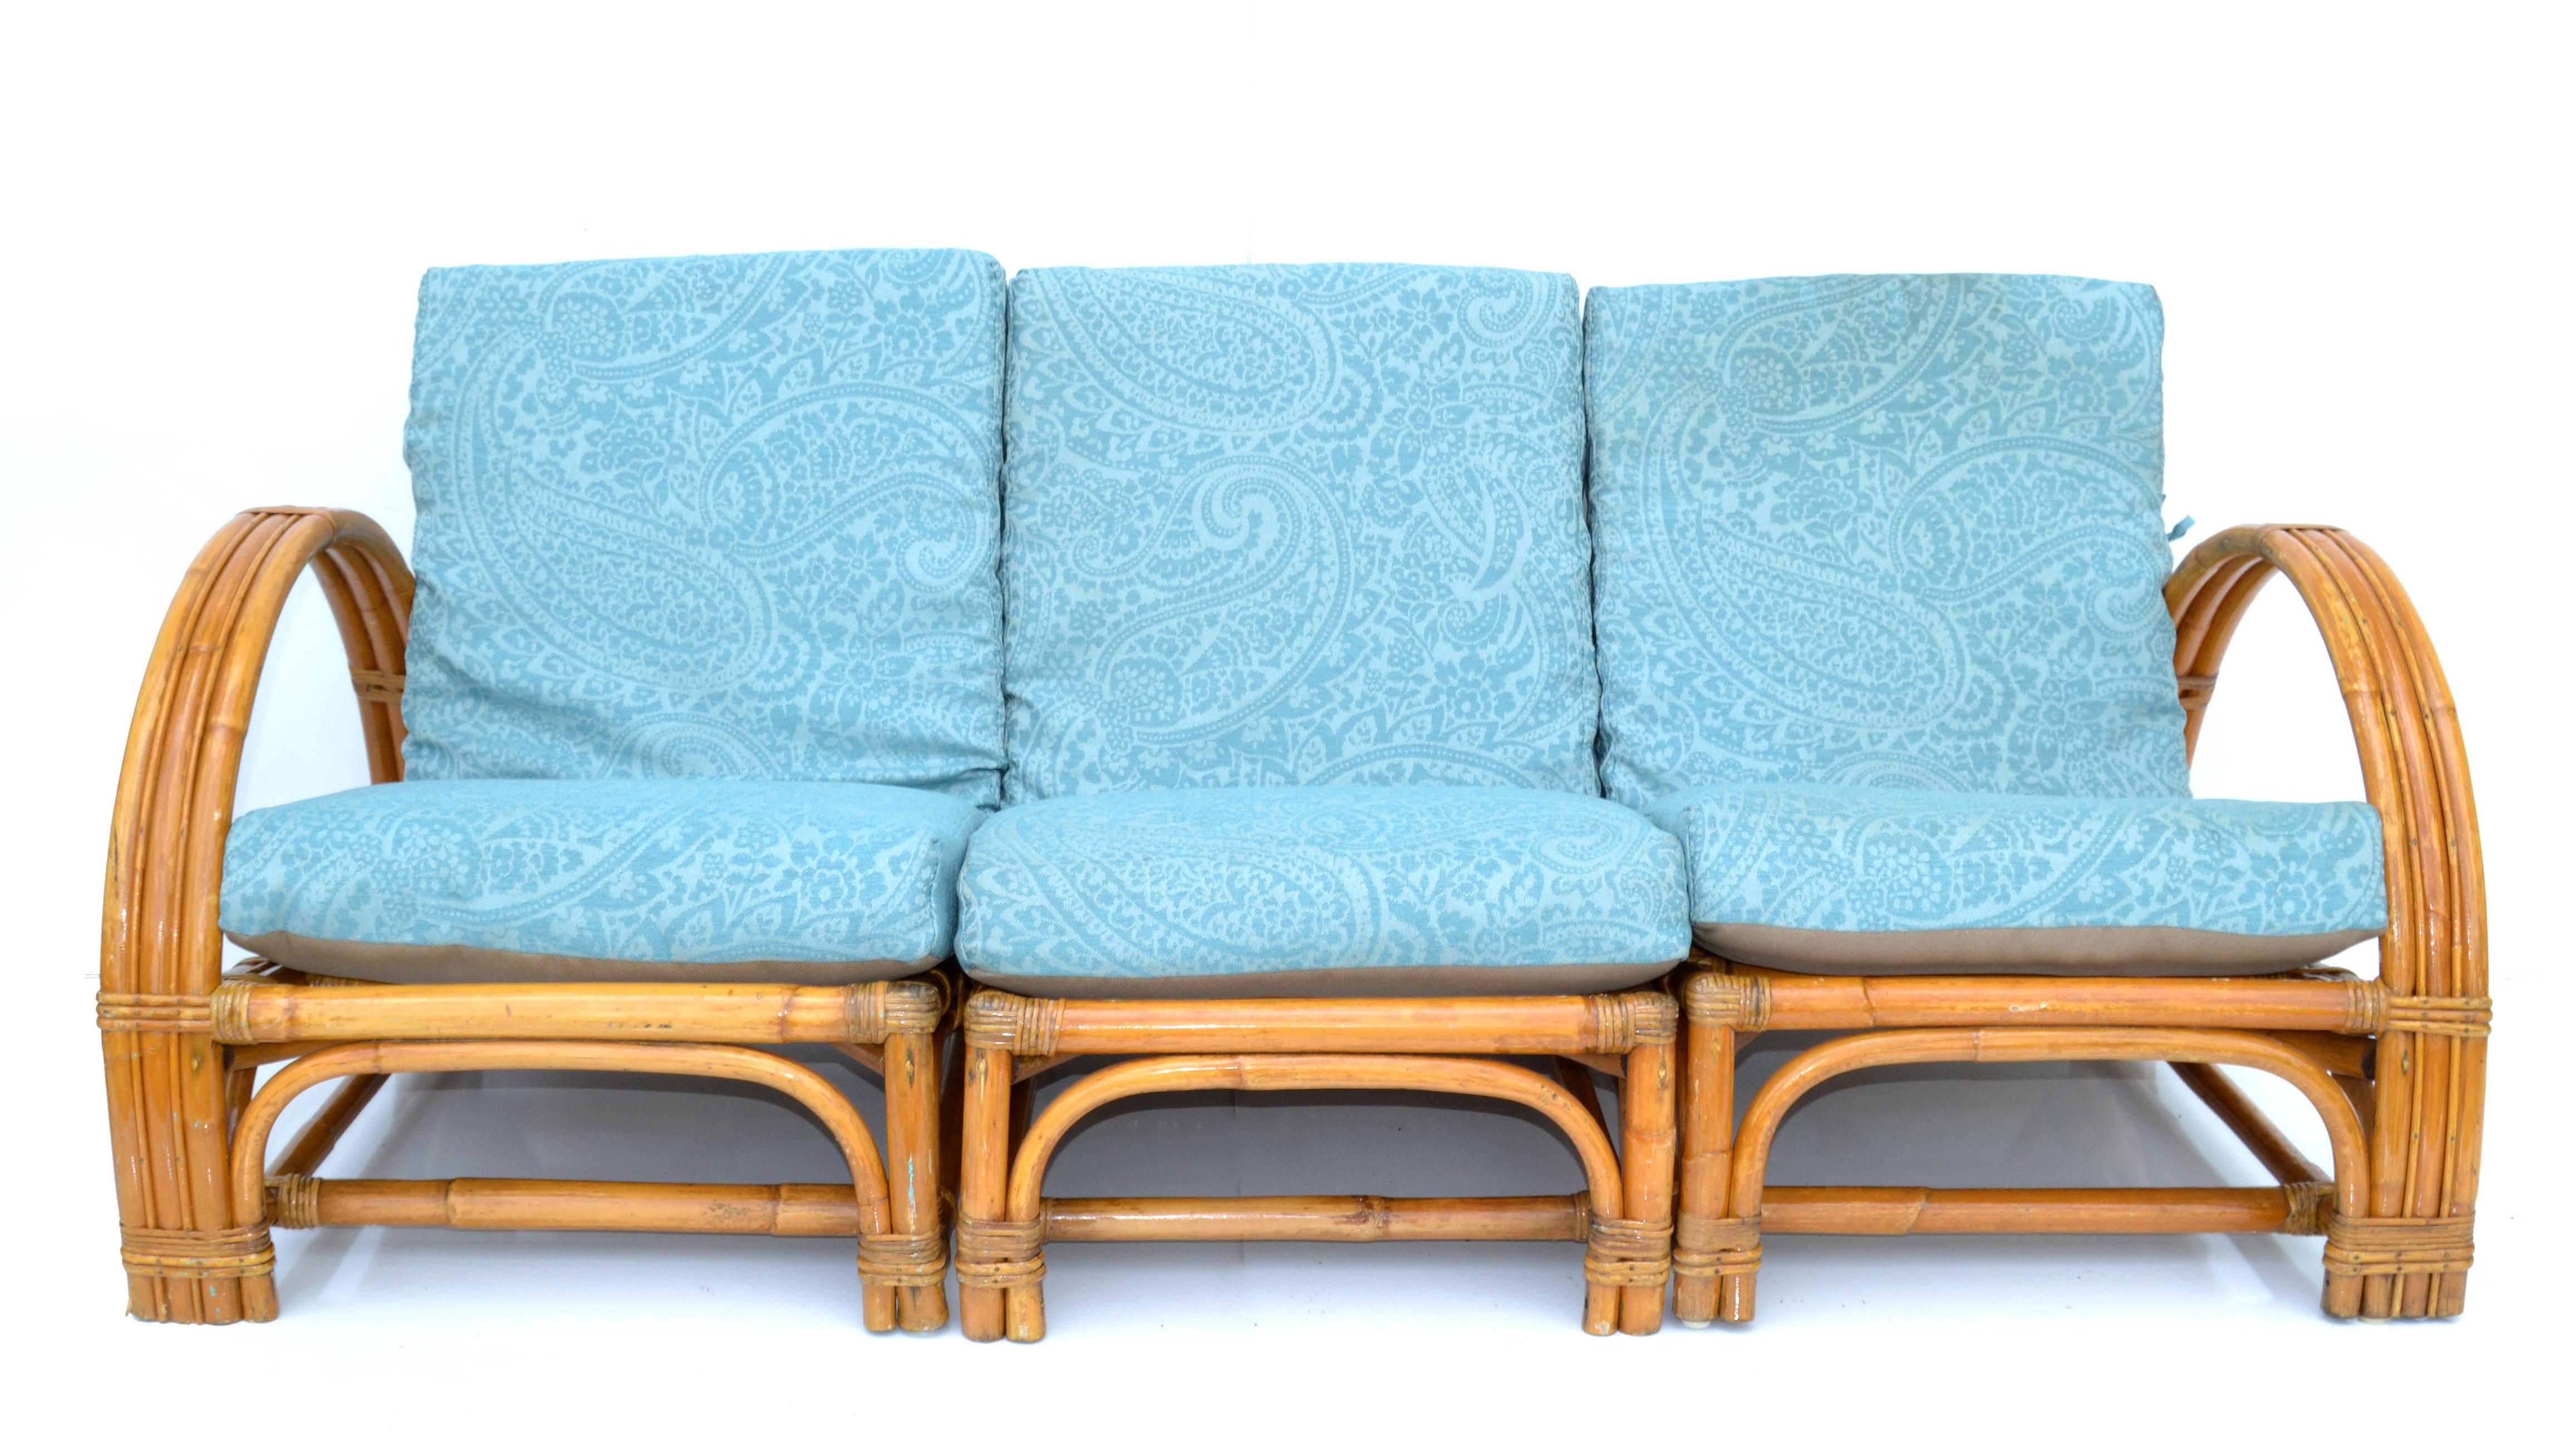 Philippine Calif Asia 4 Piece Seating Set Bamboo Sofa & Lounge Chair Turquoise Upholstery